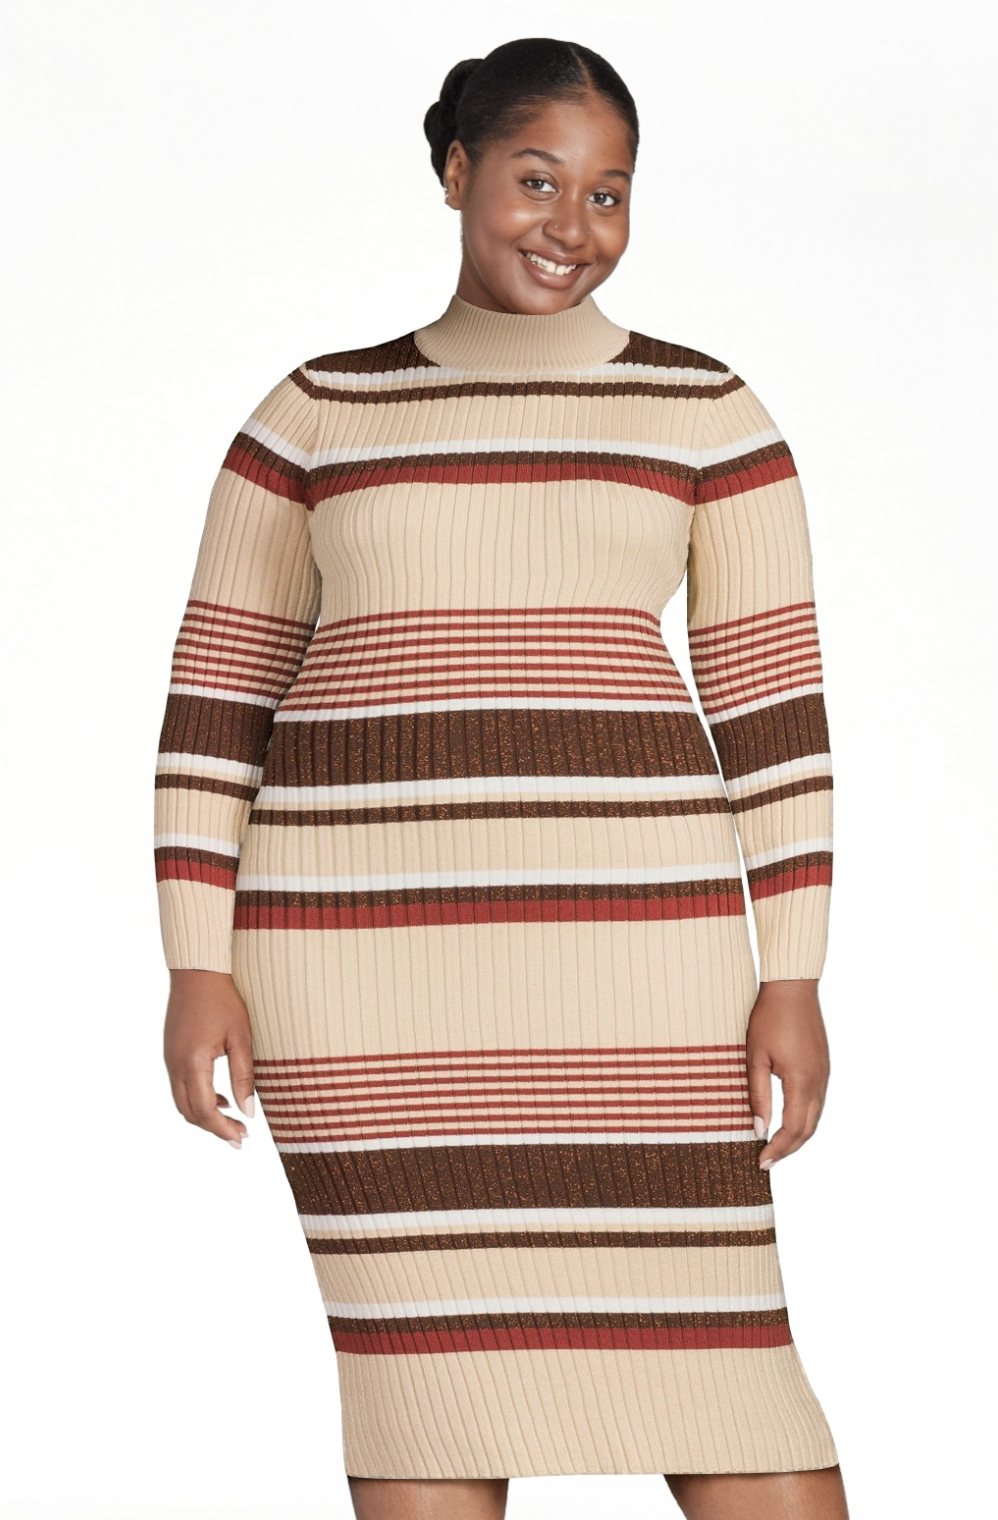 model wearing the dress in red and brown stripes